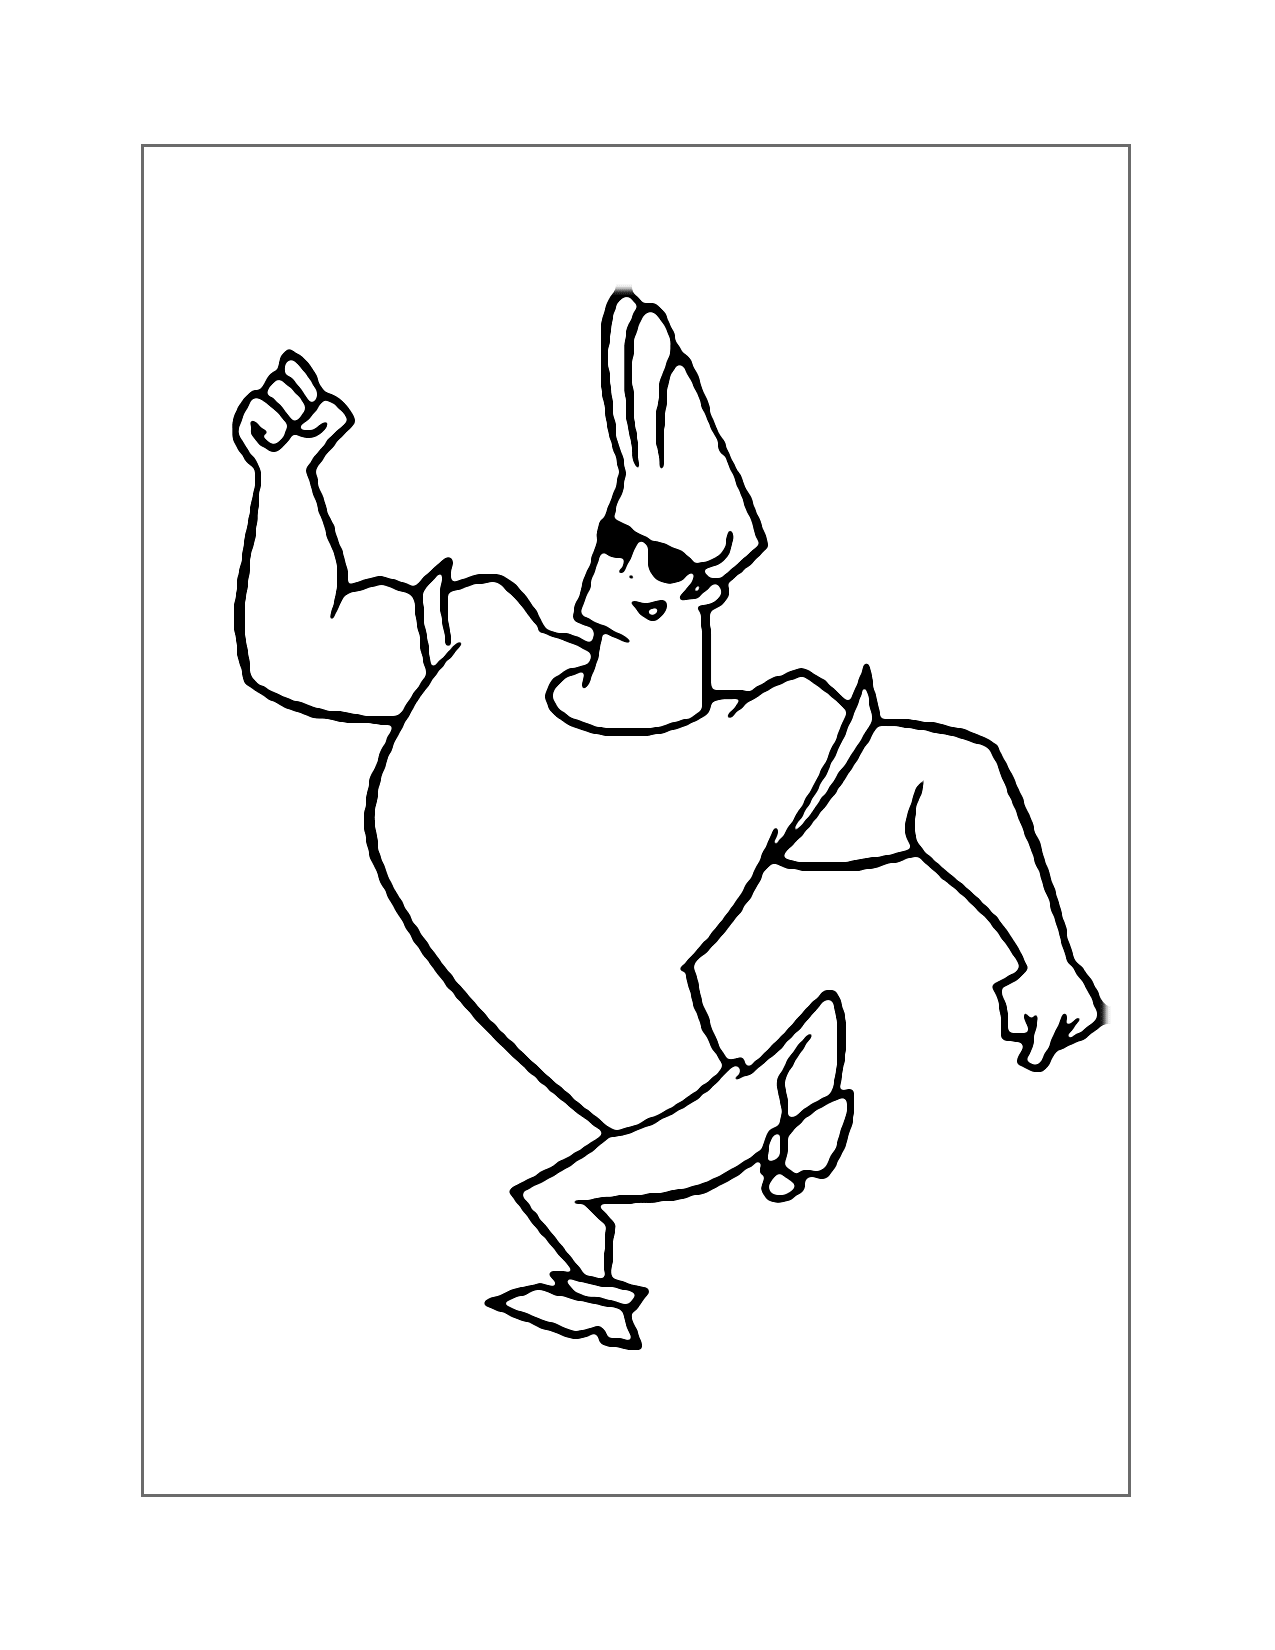 Johnny Bravo Dancing Coloring Page